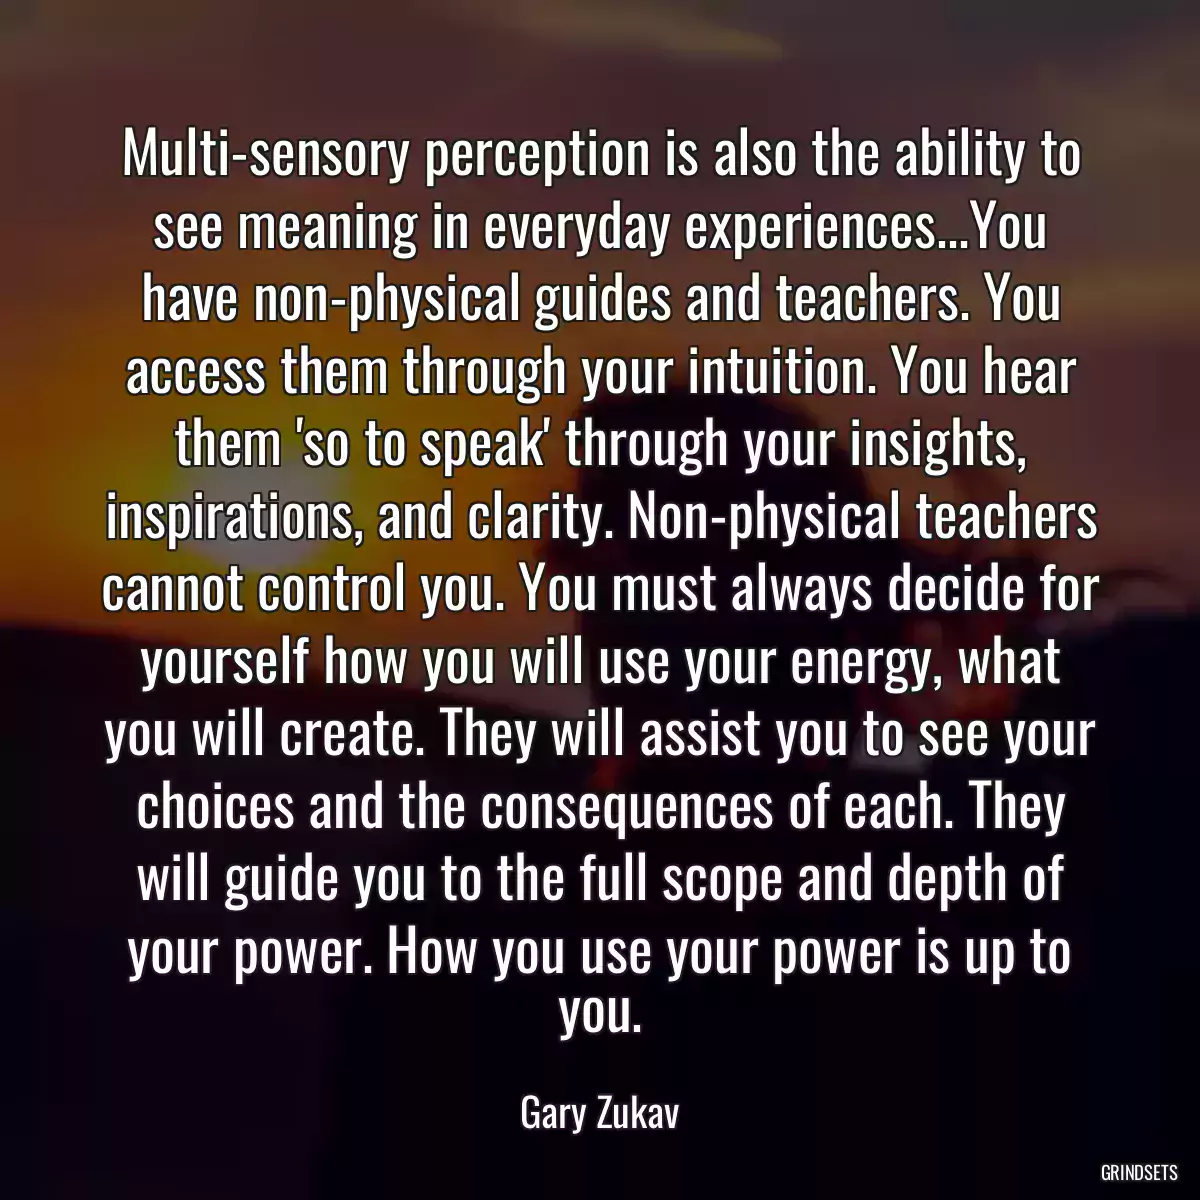 Multi-sensory perception is also the ability to see meaning in everyday experiences...You have non-physical guides and teachers. You access them through your intuition. You hear them \'so to speak\' through your insights, inspirations, and clarity. Non-physical teachers cannot control you. You must always decide for yourself how you will use your energy, what you will create. They will assist you to see your choices and the consequences of each. They will guide you to the full scope and depth of your power. How you use your power is up to you.